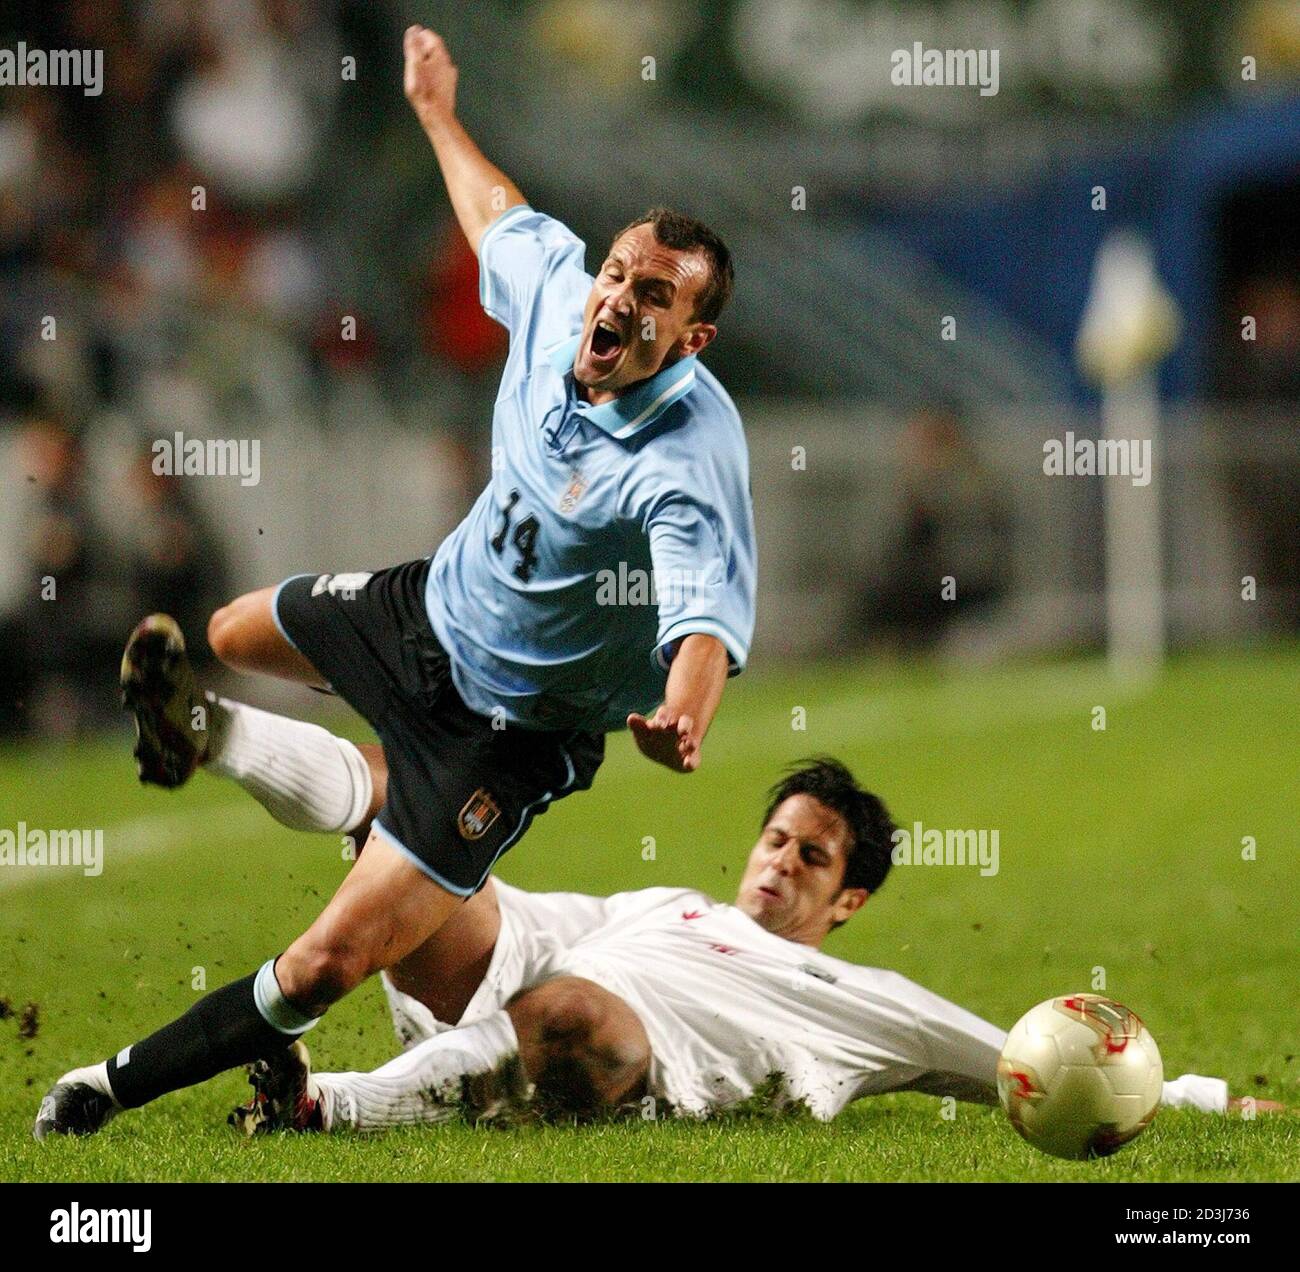 Uruguay's Julio Rodriguez (L) is tackled by Iran's Hamed Kavianpour during  their Carlsberg Cup final in Hong Kong February 4, 2003. Uruguay beat Iran  5-3 in the penalty shootout after the 120